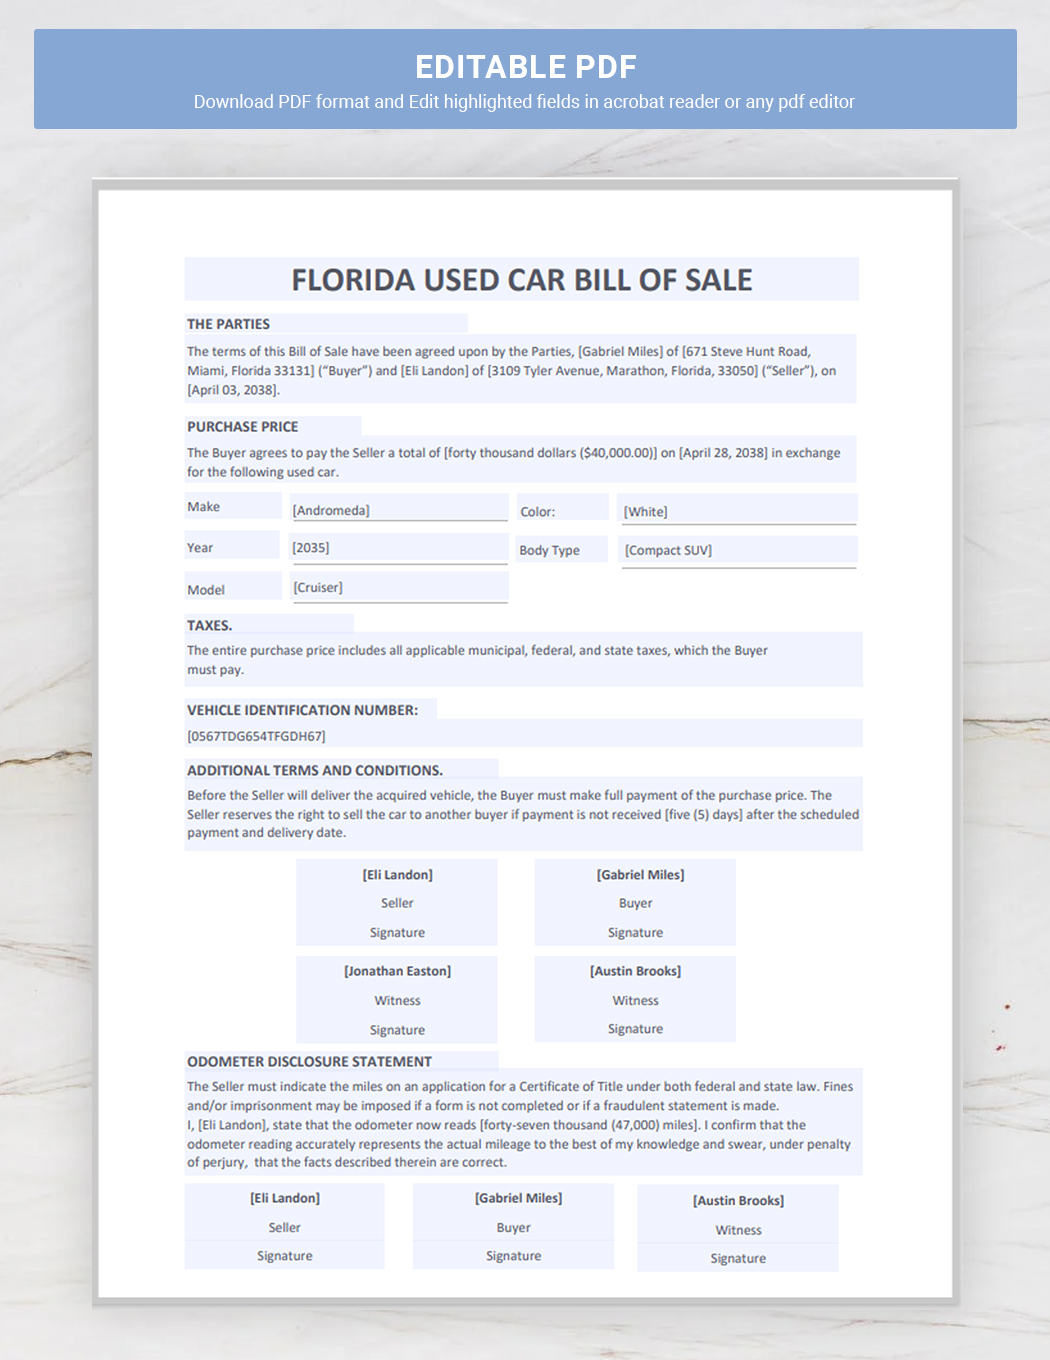 Florida Used Car Bill of Sale Template